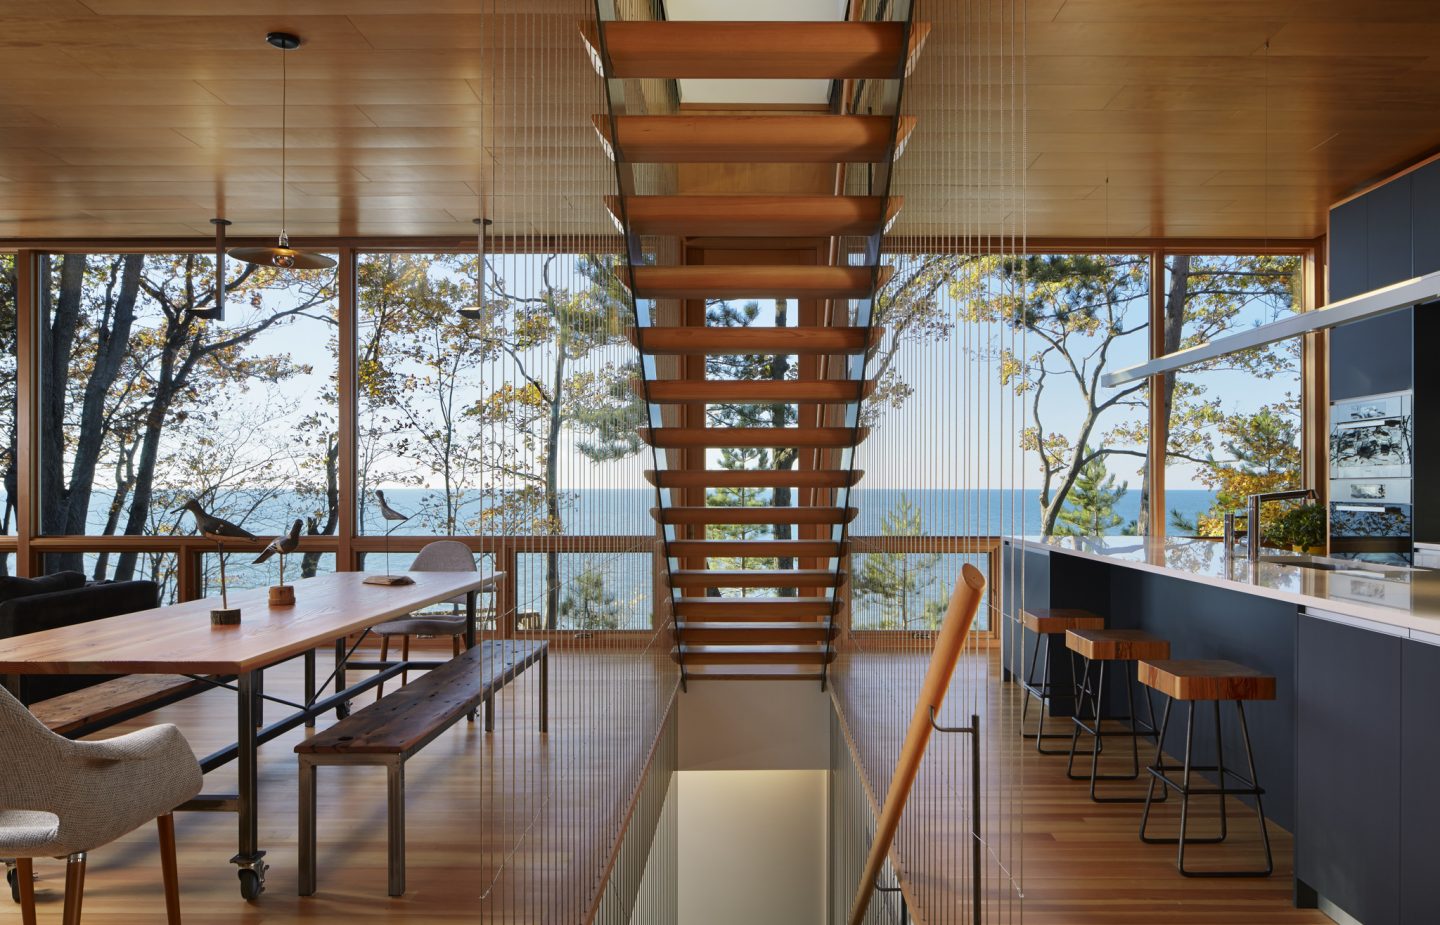 A wall of glass in a waterfront home gives an unobstructed view of nature. Modern kitchen design and open riser staircase shine in a warm yet modern house design. #waterfront #housedesign #staircase #openrisers #warmmodern